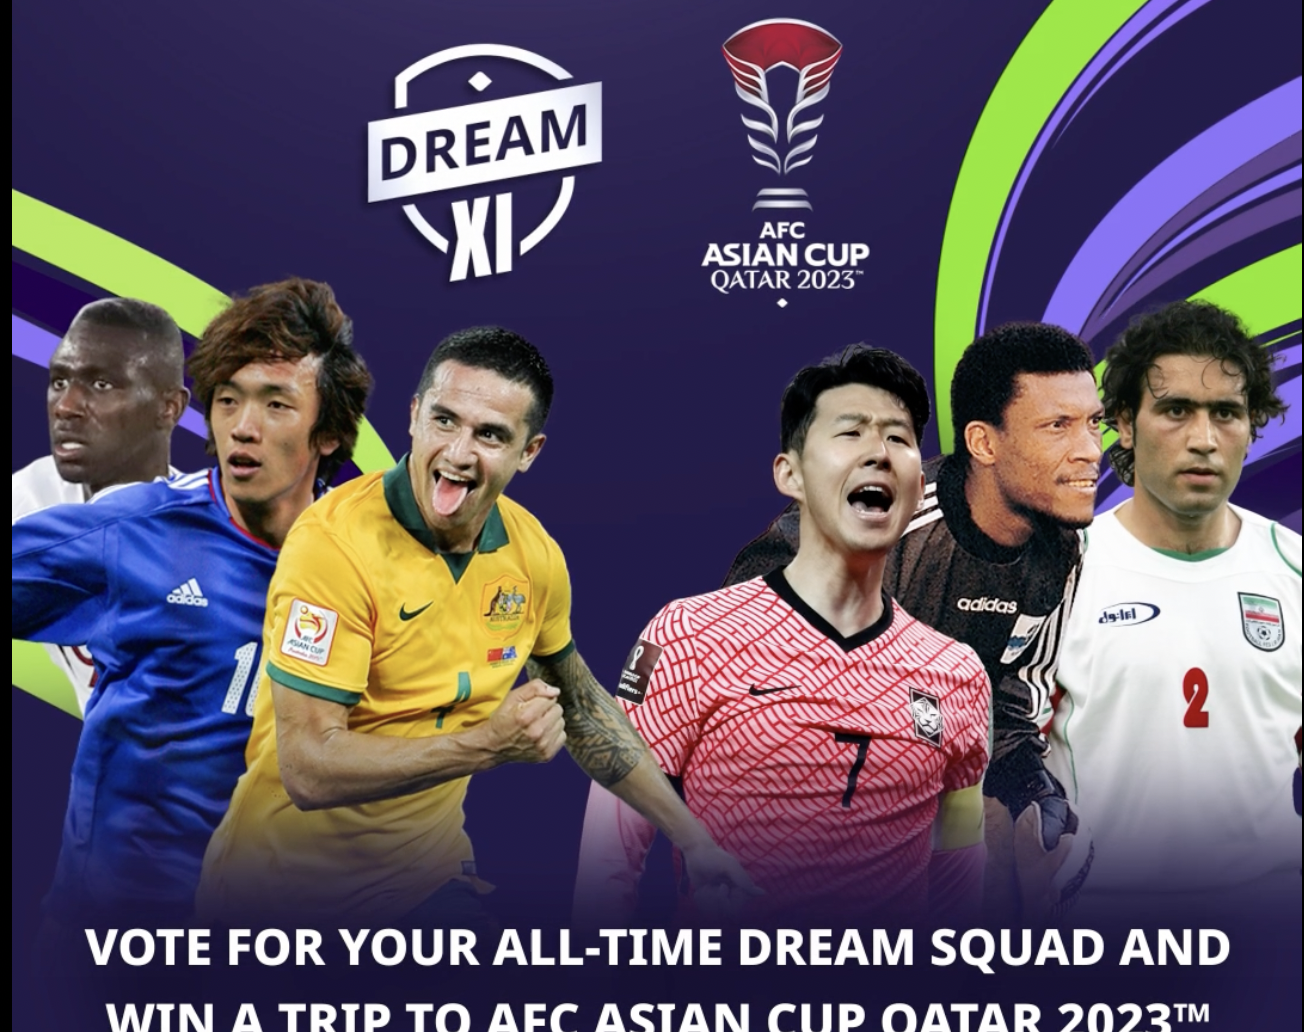 AFC kicks off 6-month countdown to Asian Cup with Dream XI fan campaign